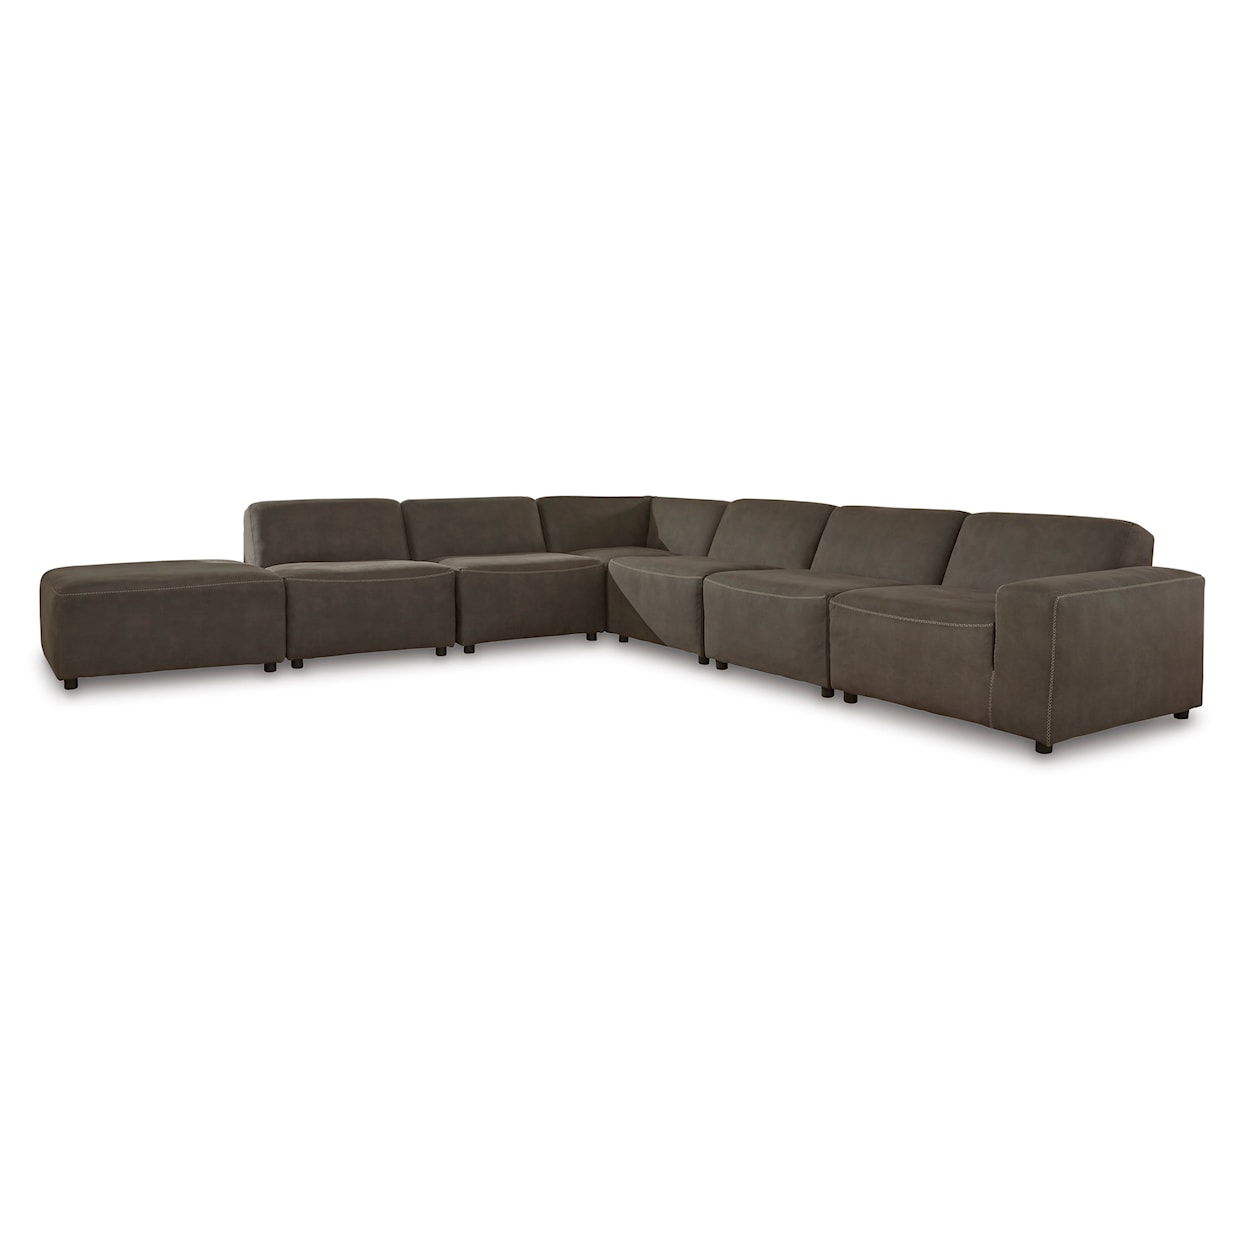 Signature Design by Ashley Allena 7-Piece Sectional